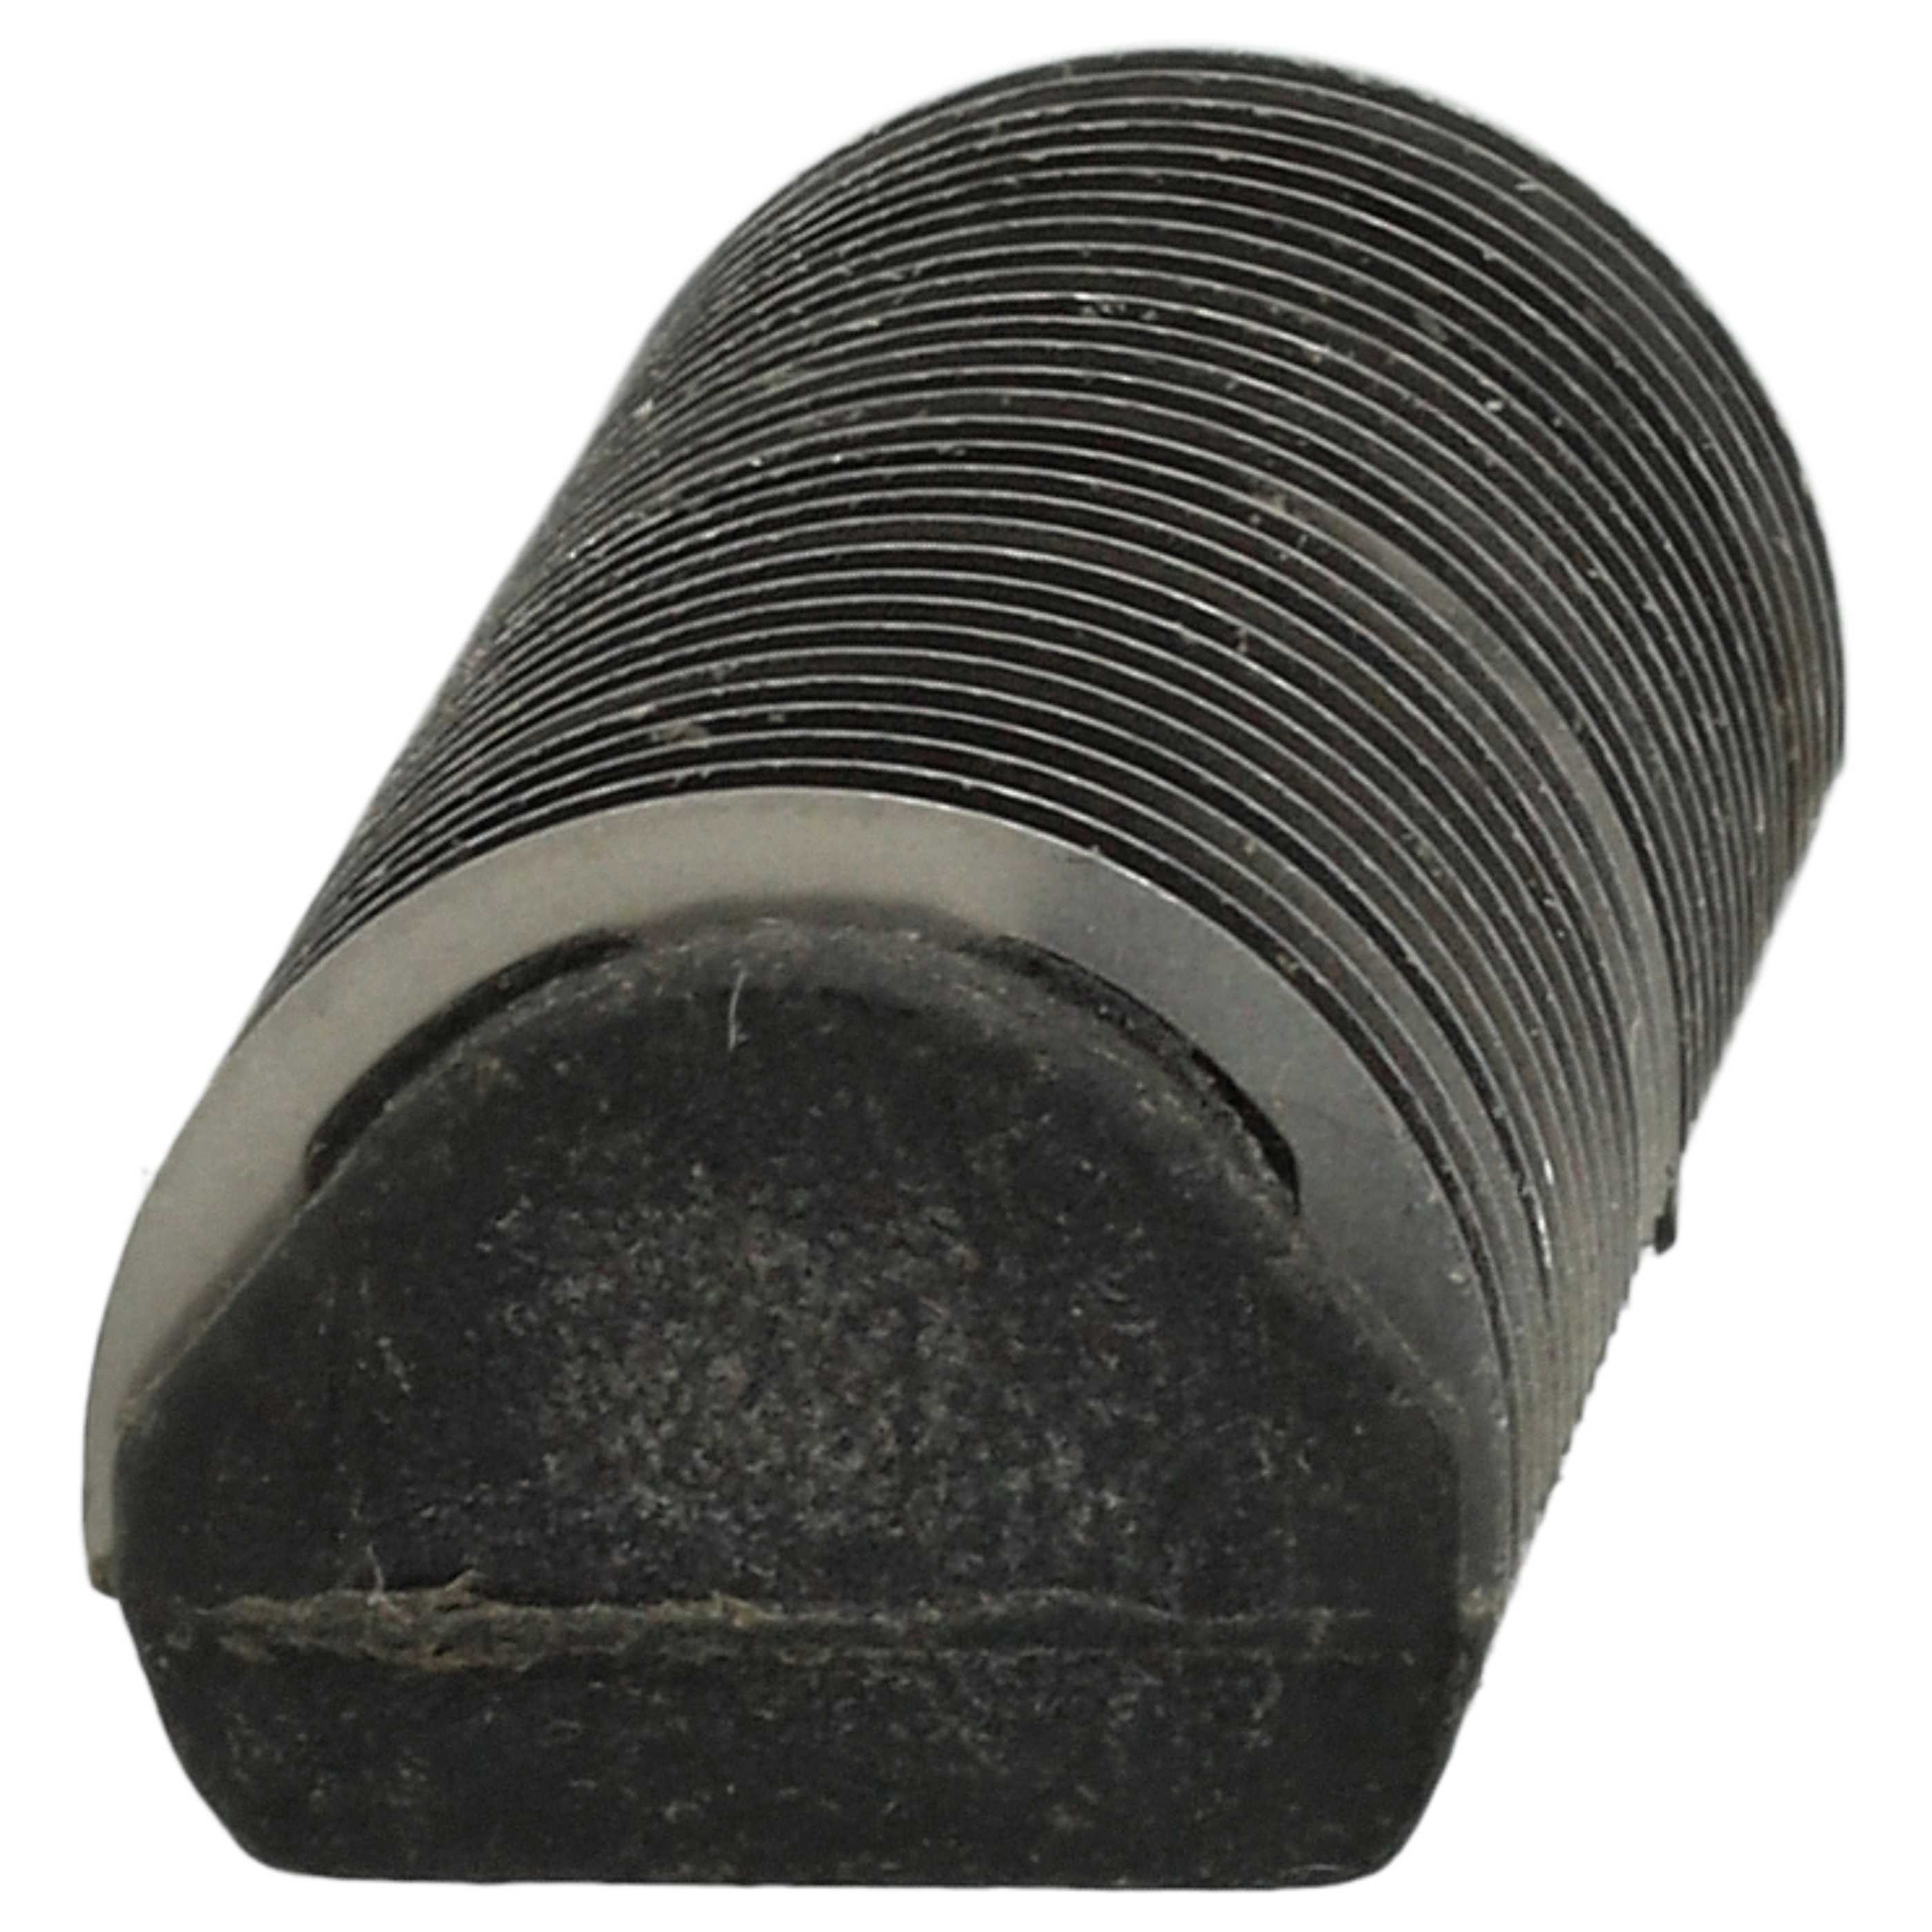 Cutter block suitable for Braun S Shaver - Stainless Steel